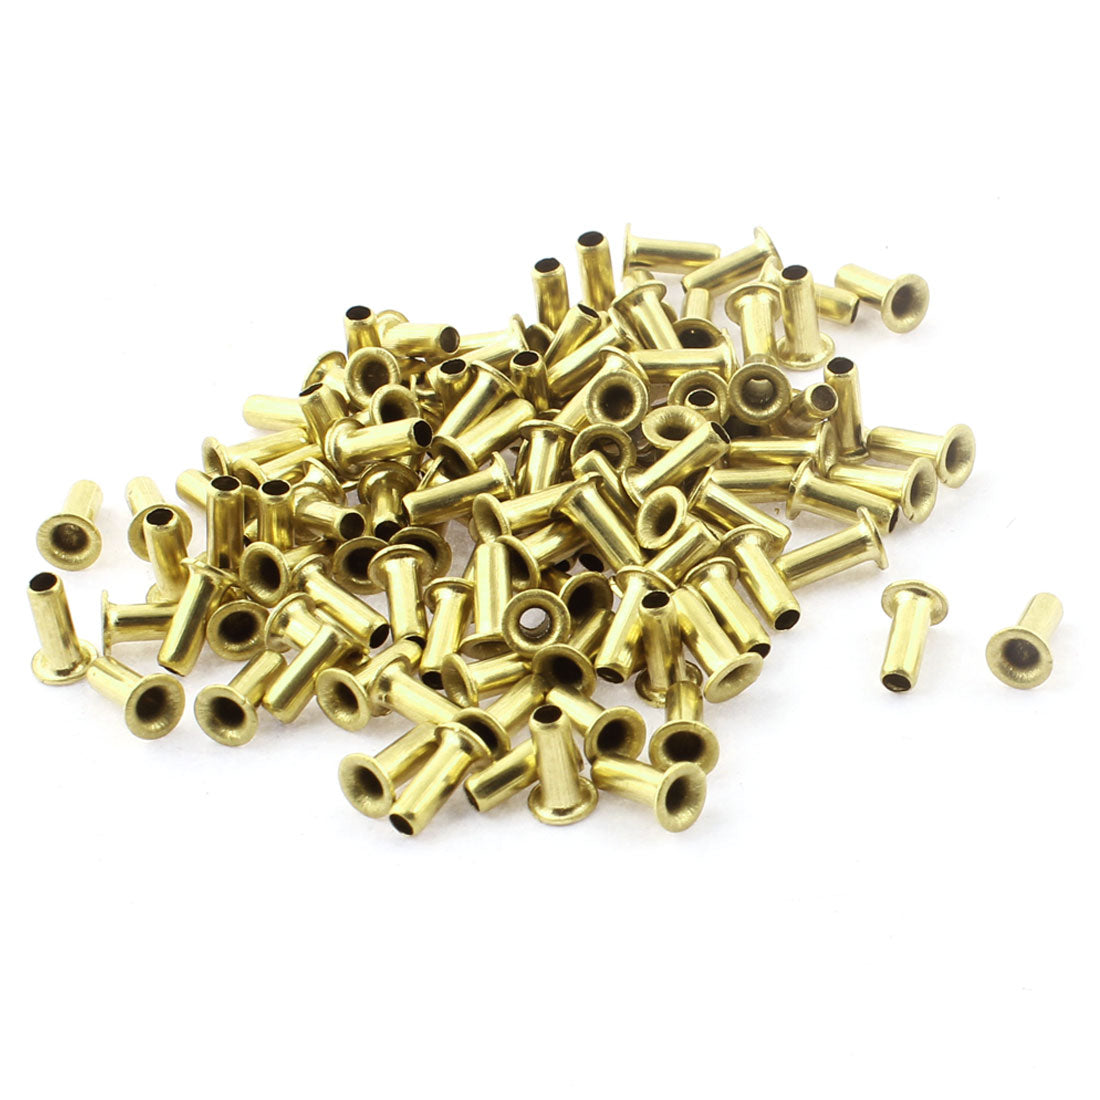 uxcell Uxcell 120pcs M3 x 8mm Copper Through Hole Hollow Rivets Grommets Double-sided Circuit Board PCB Via Vias Nails Fastener